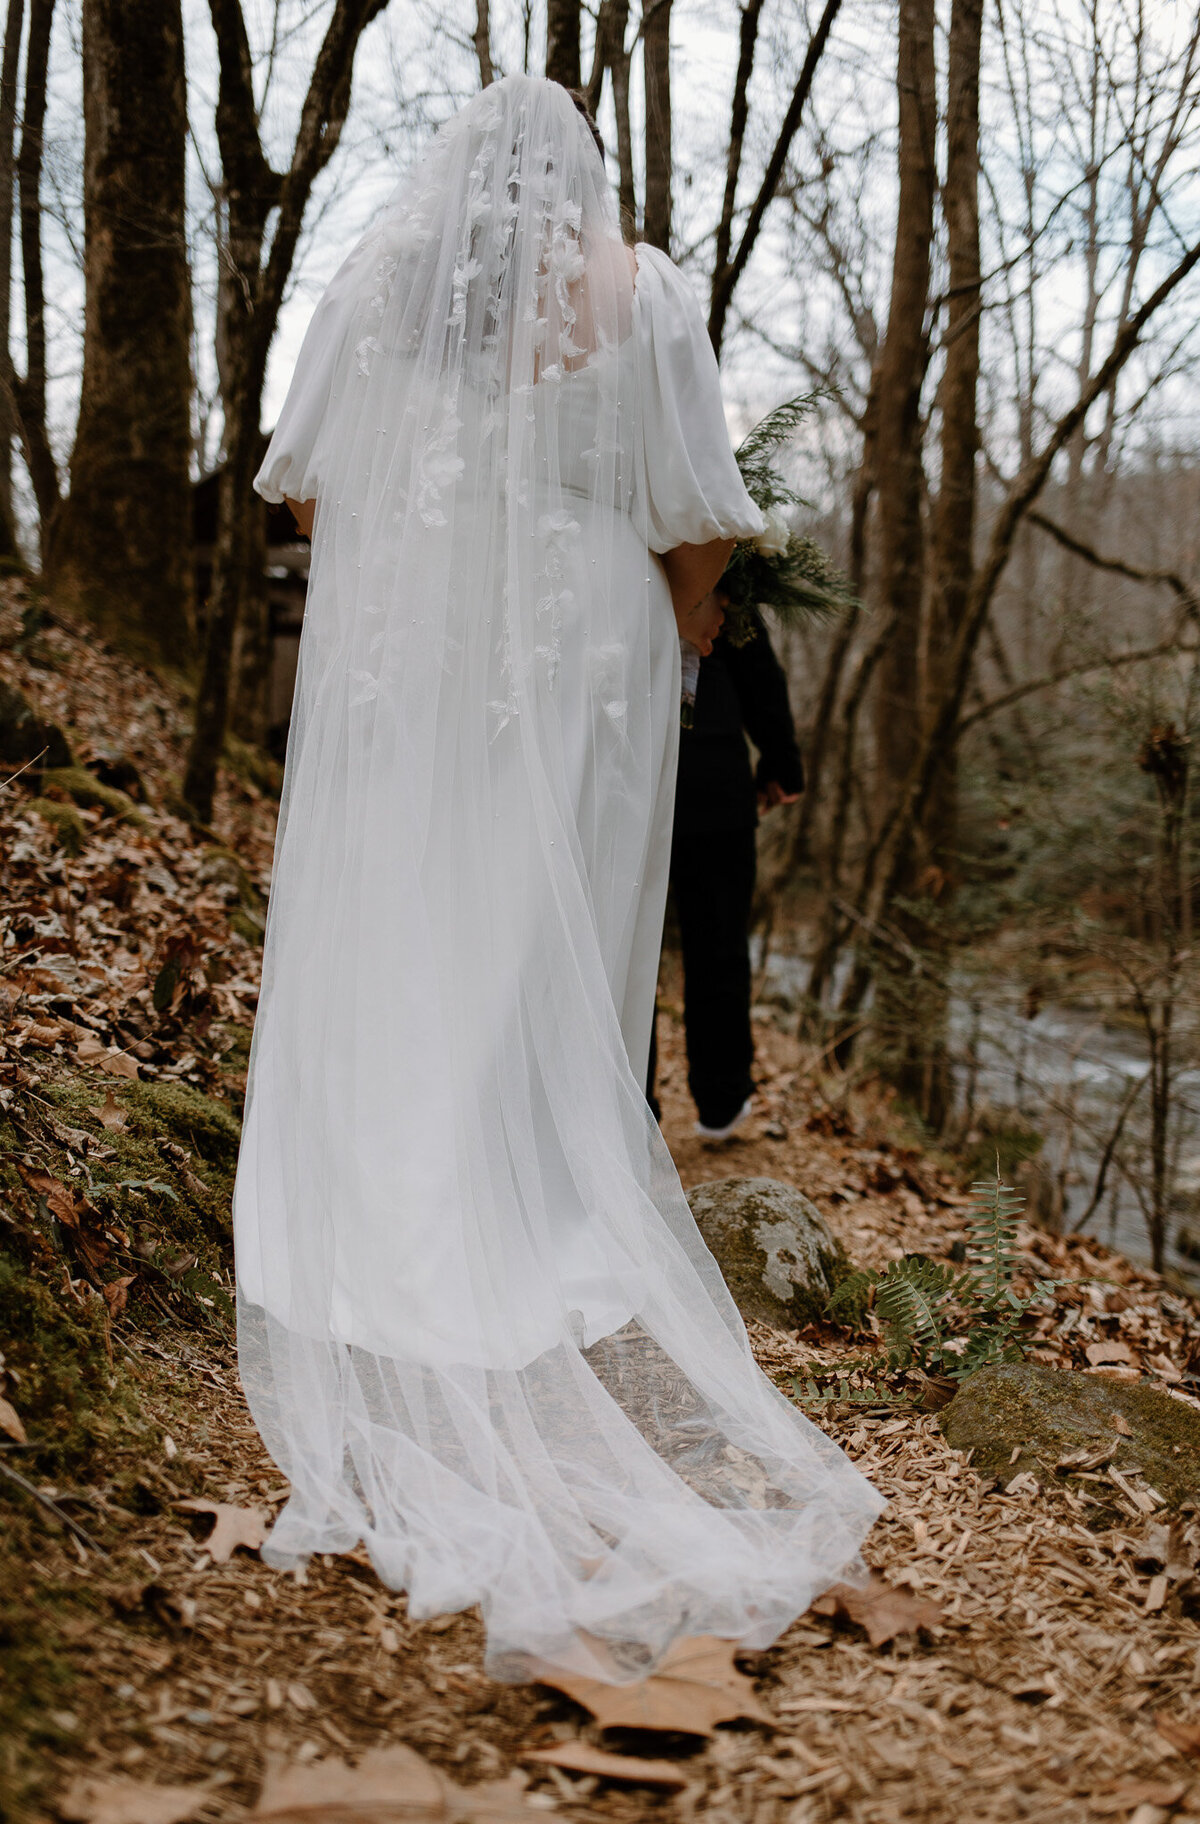 Detail shot of the bride's veil trialing behind her as she walks through the woods at her forest elopement in the Smoky Mountains.